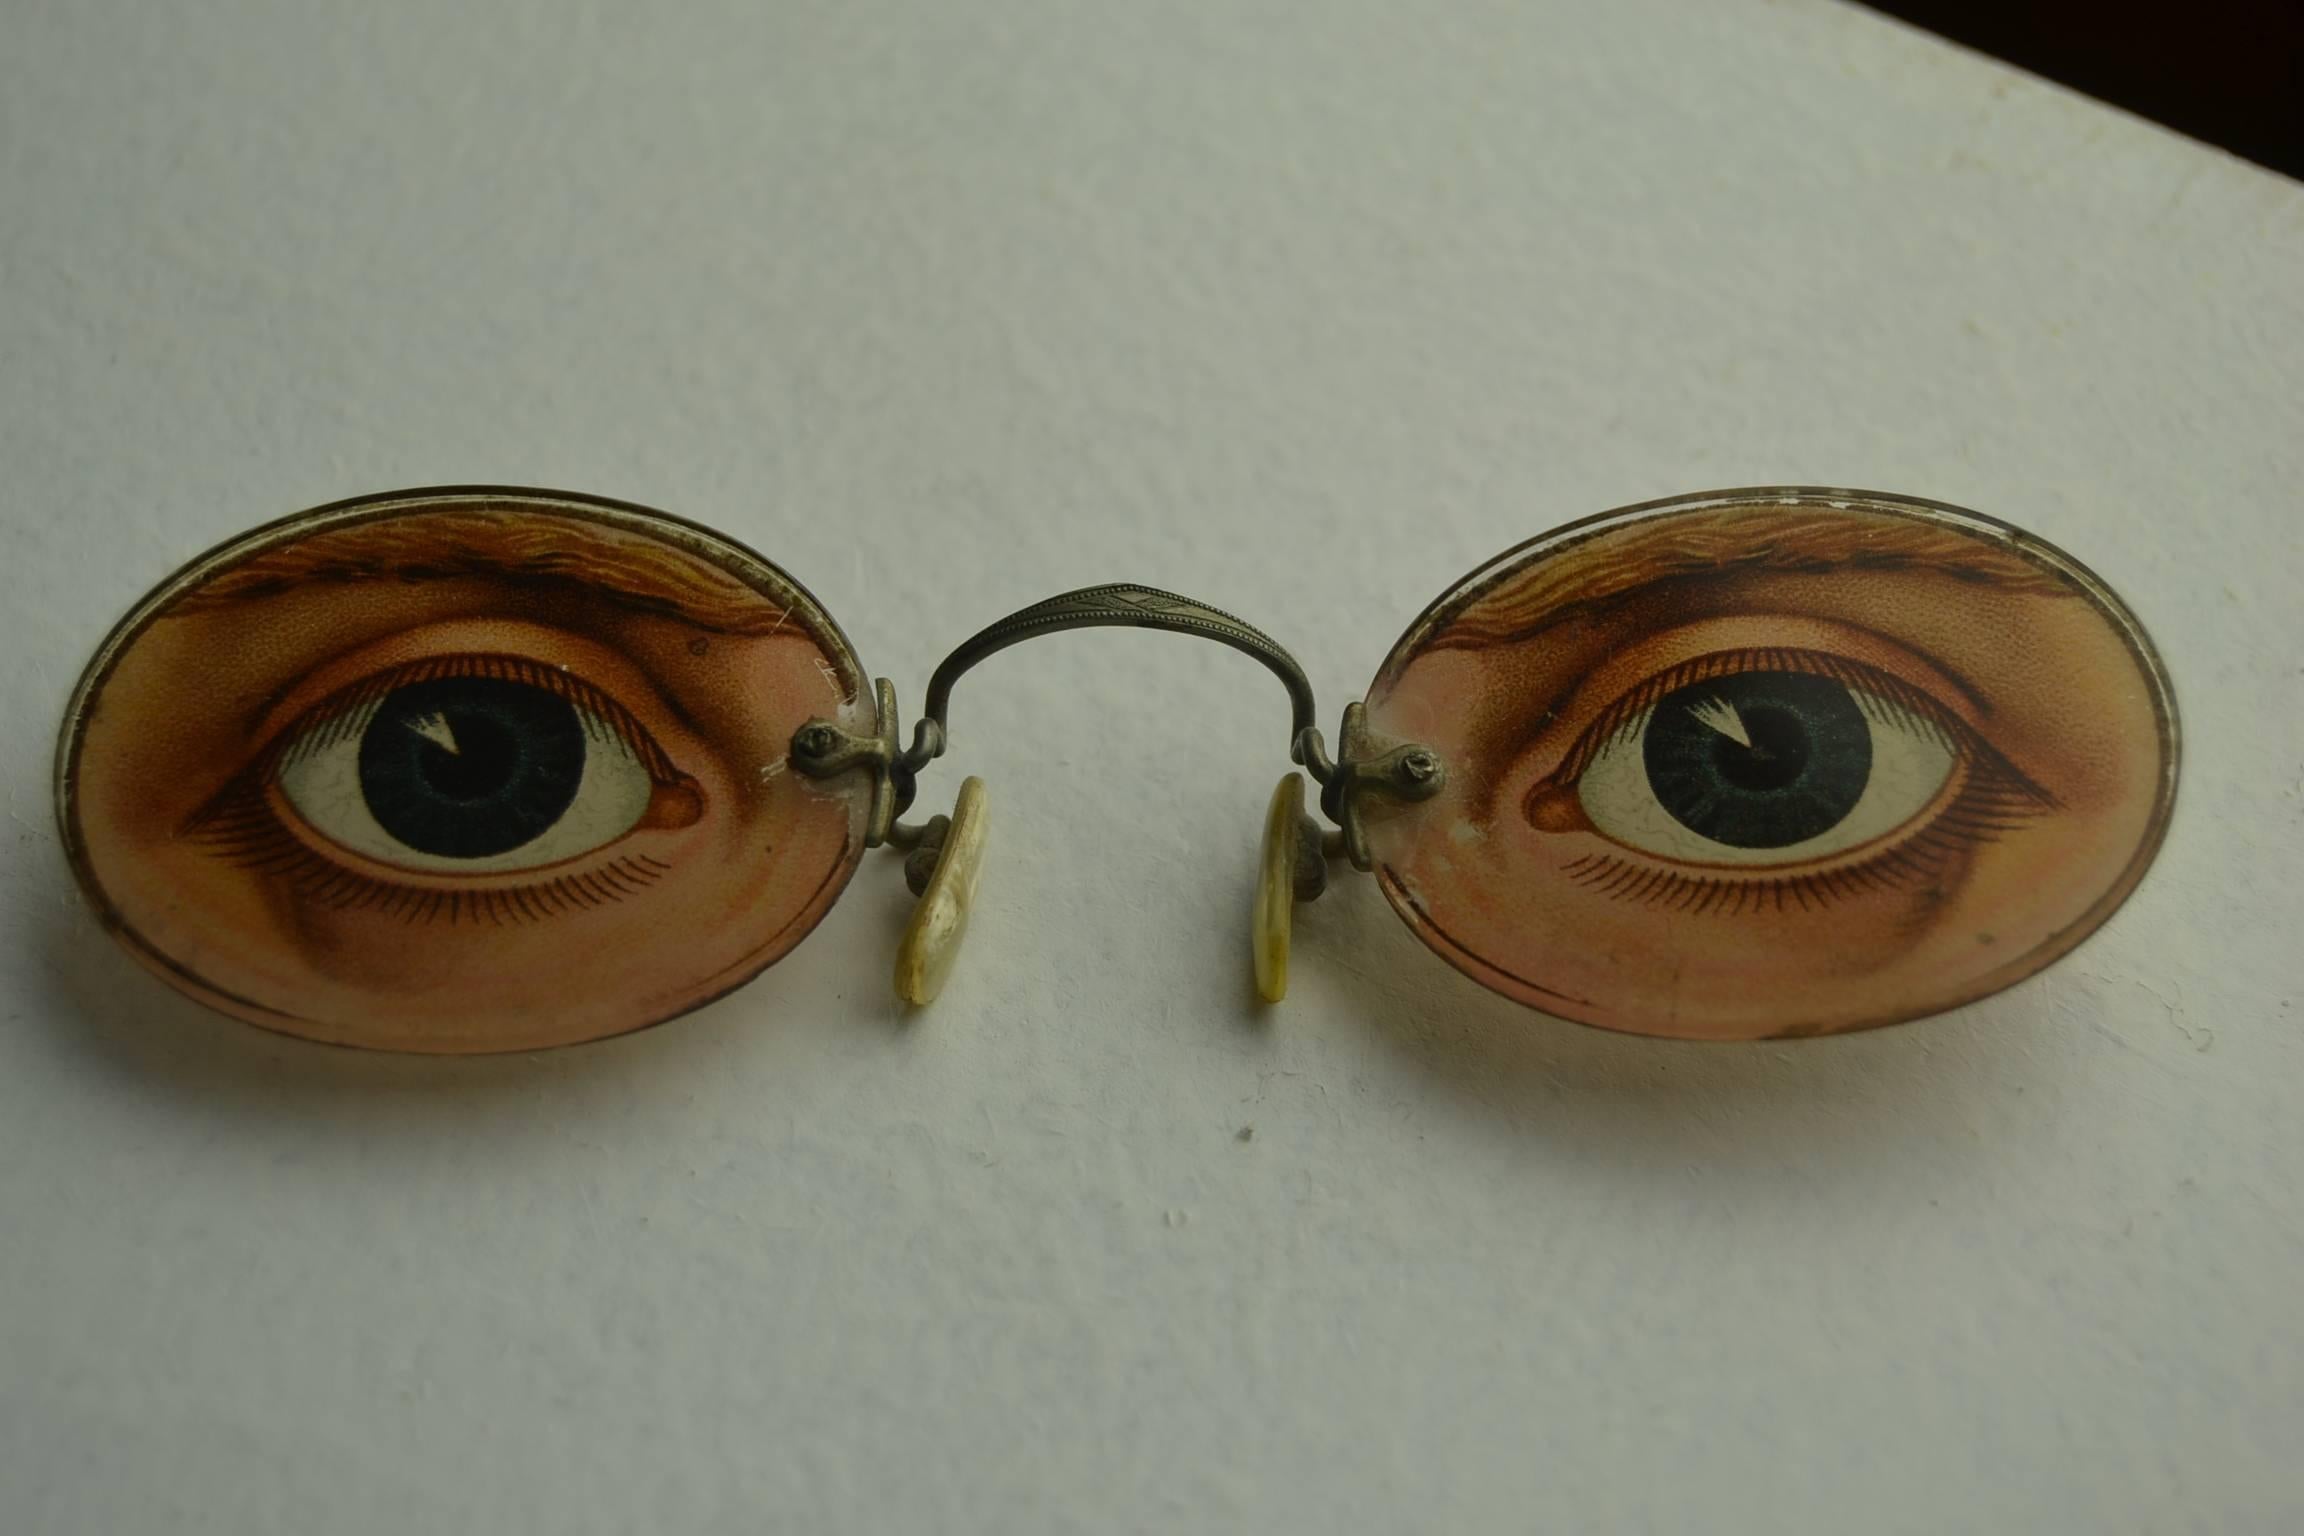 Unique pince-nez / pinch nose spectacle from the early 20th century.
Hard metal silver tone bridge with nose clips of mother-of-pearl.
Rare glasses with vintage image illustration of human eyes.
Miniature optical sign optometrist sign